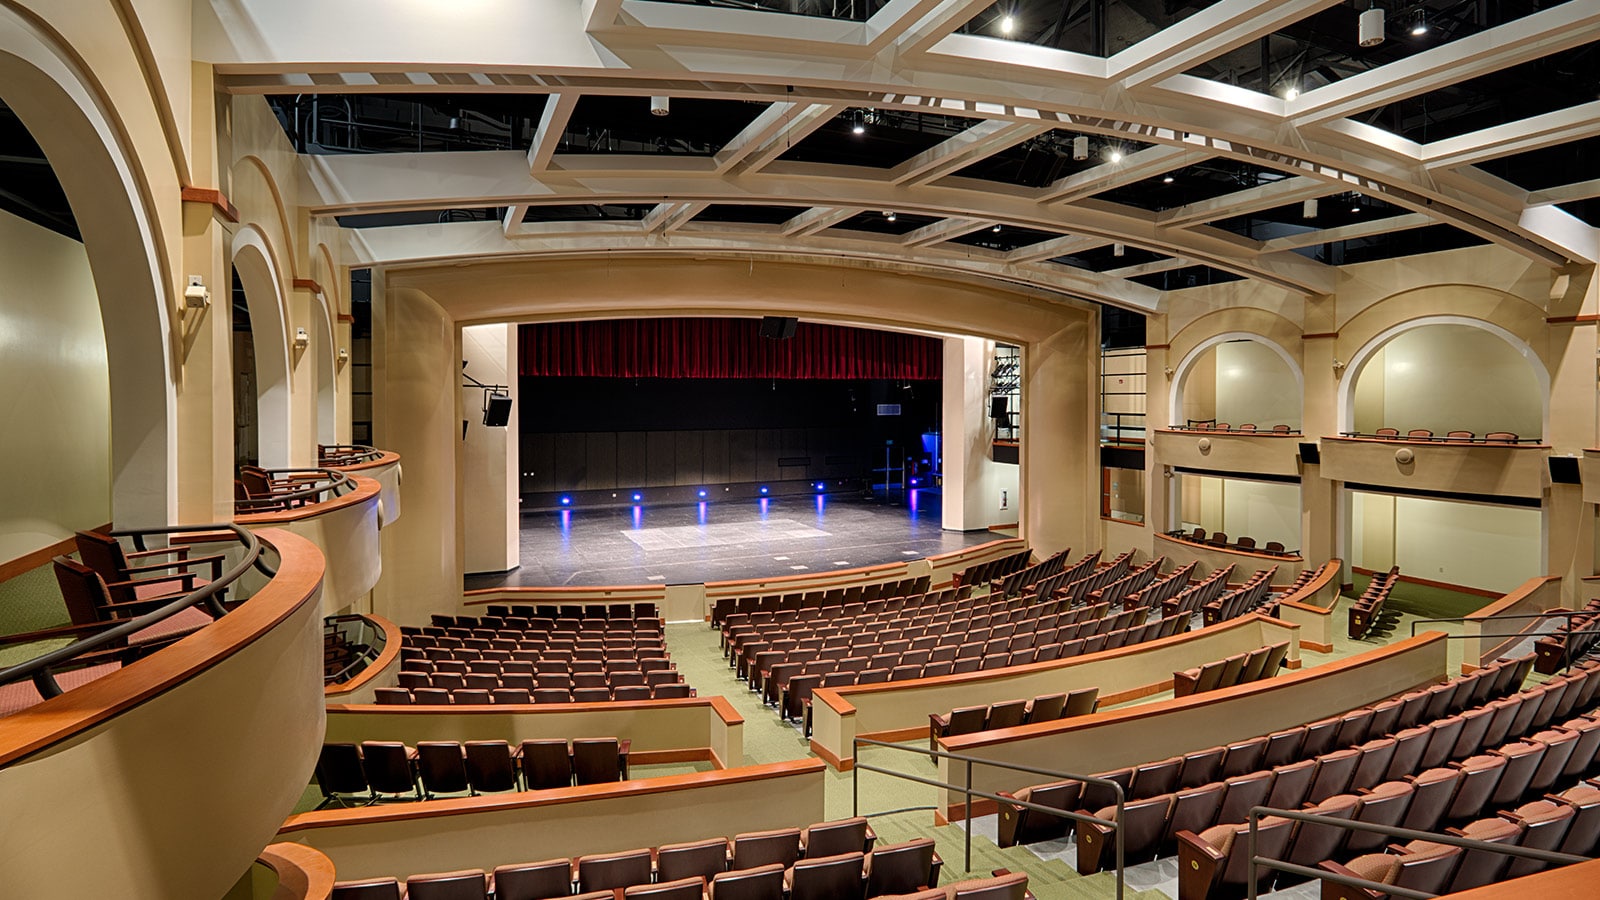 Meyer Sound Constellation a “Game-changer” at Palo Alto High School’s Performing Arts Center